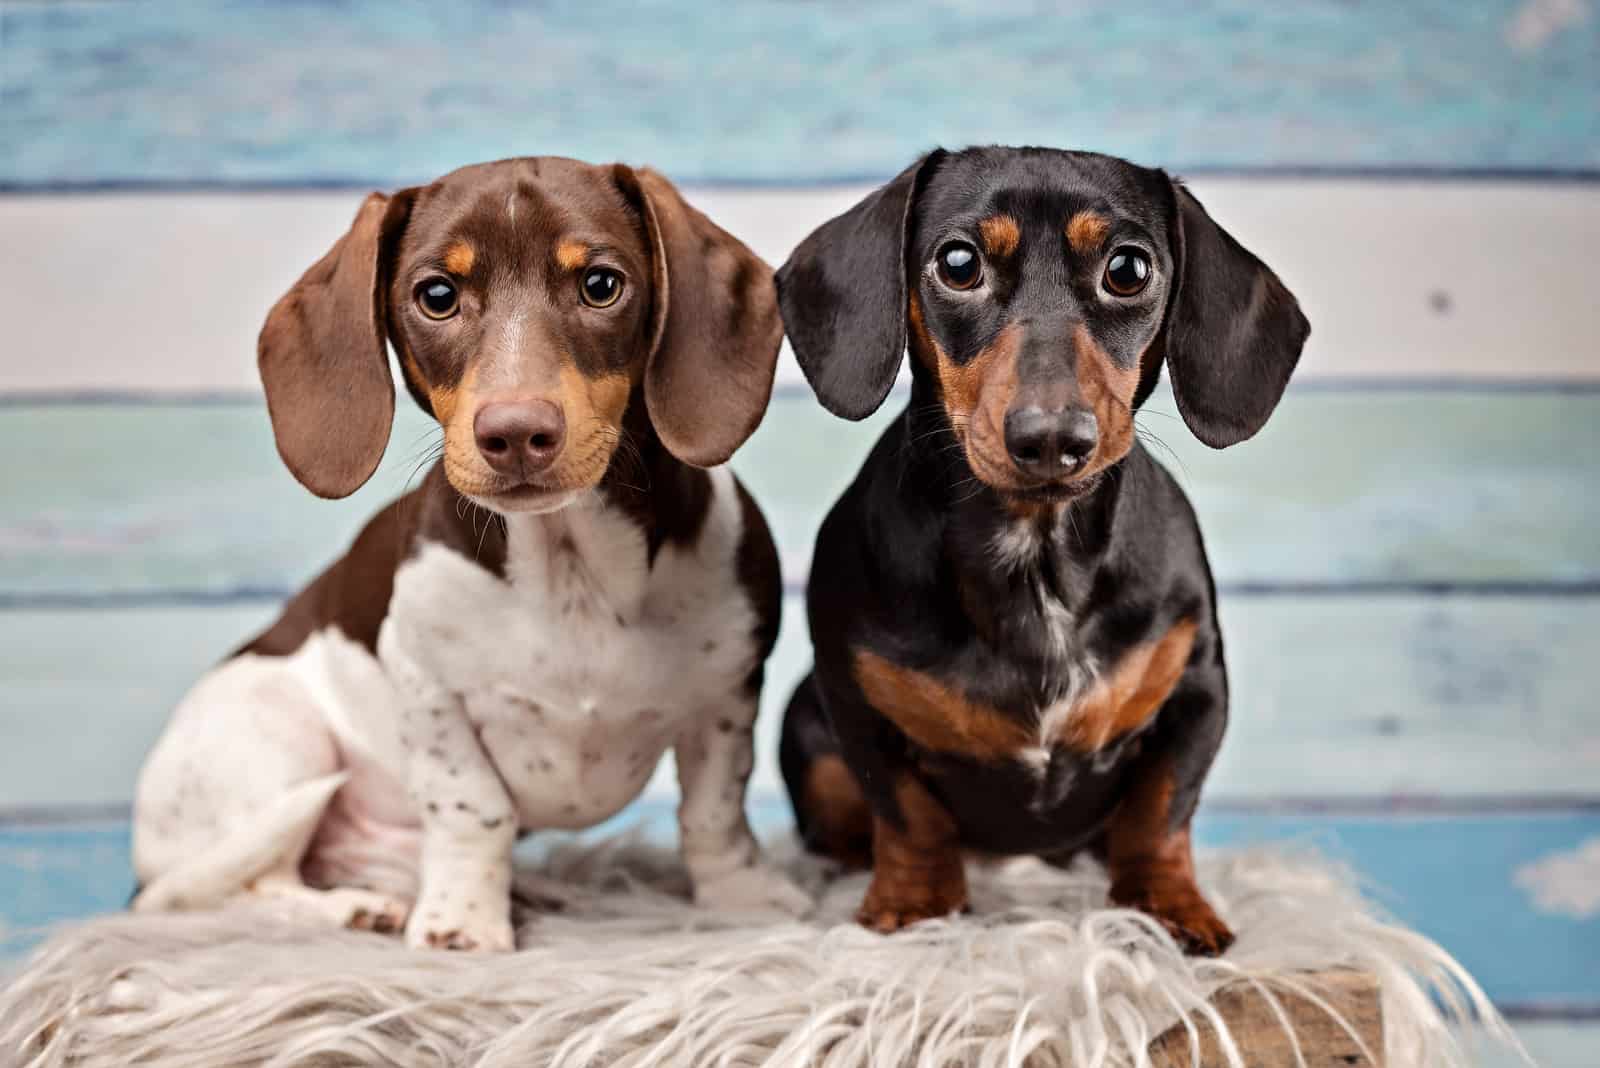 two cute dachshund dog in different colors posing